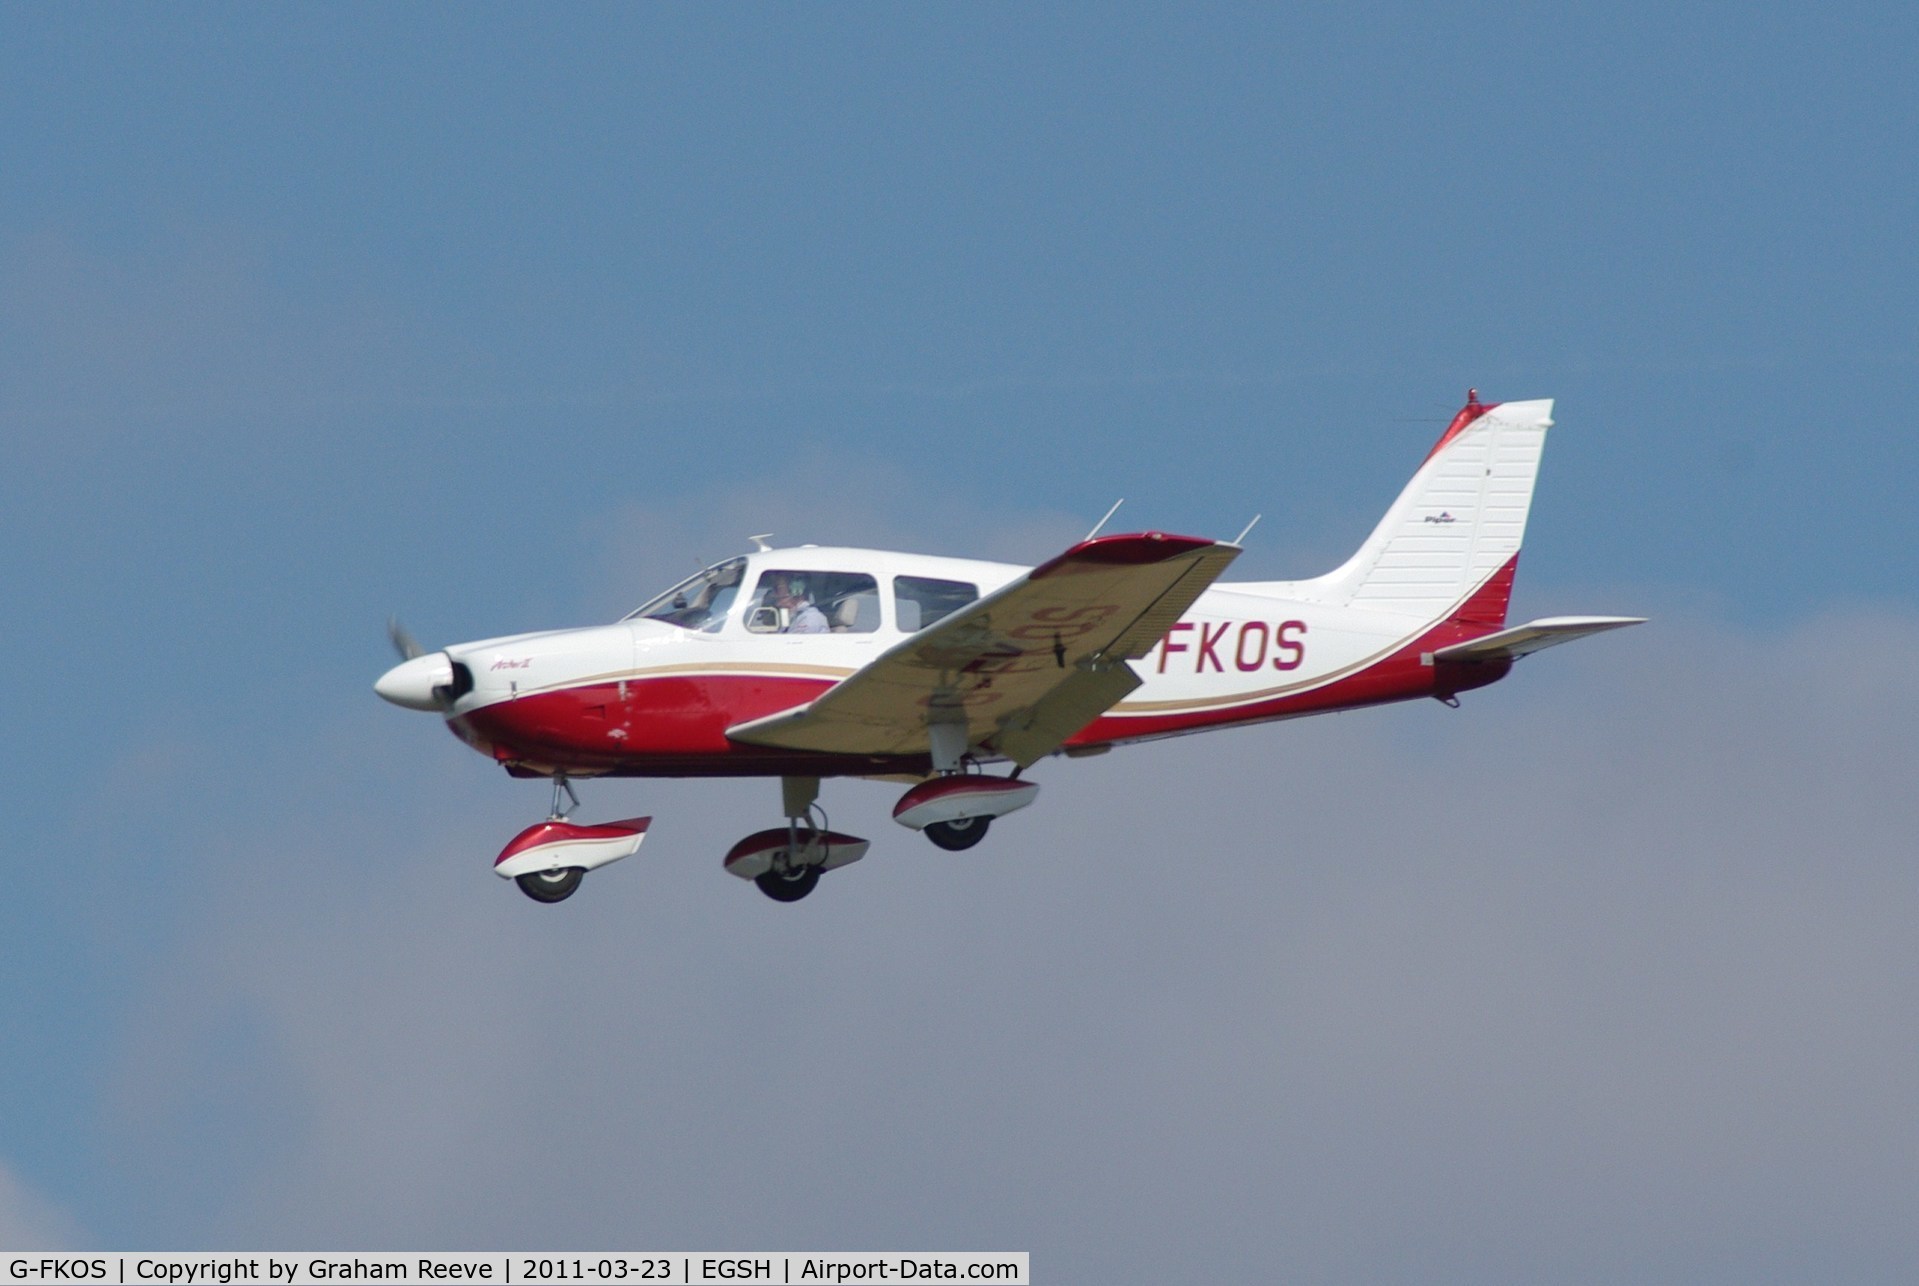 G-FKOS, 1977 Piper PA-28-181 Cherokee Archer II C/N 28-7790591, About to land.